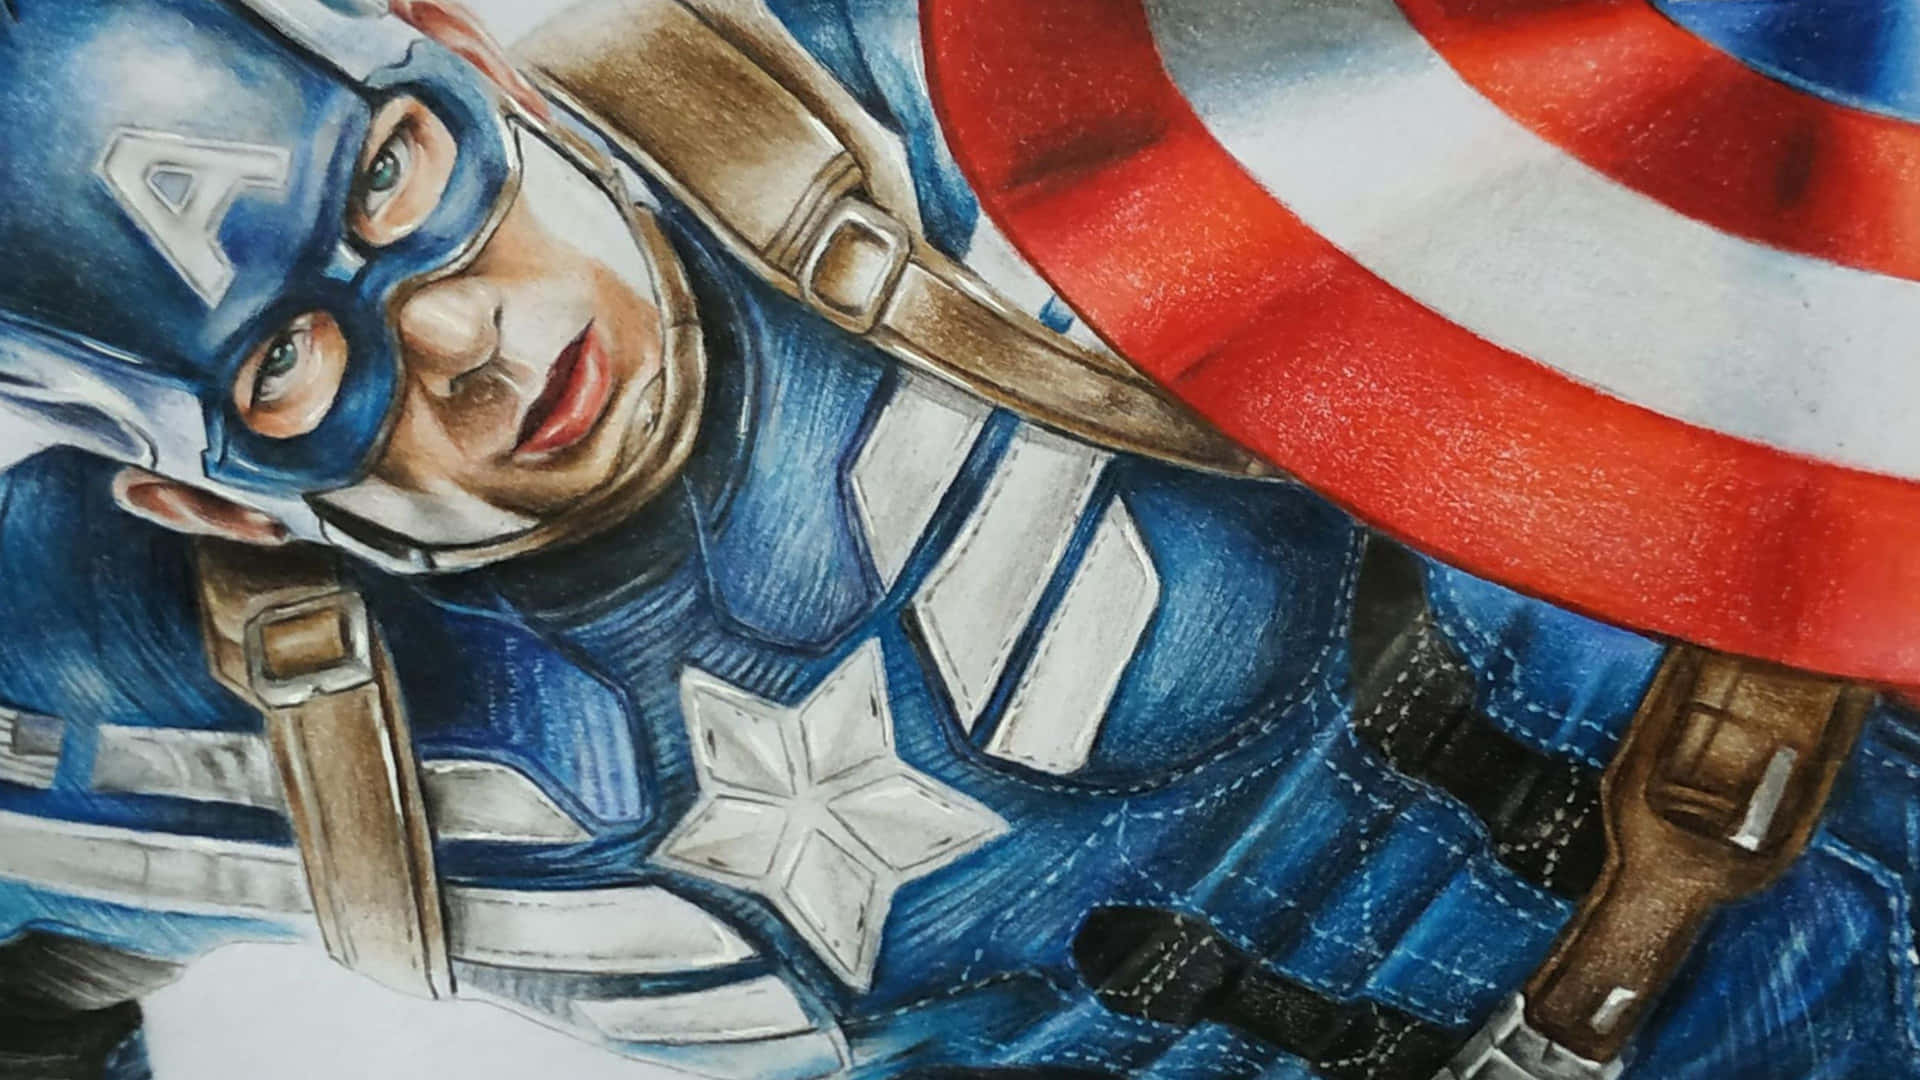 "Captain America in All His Glory"